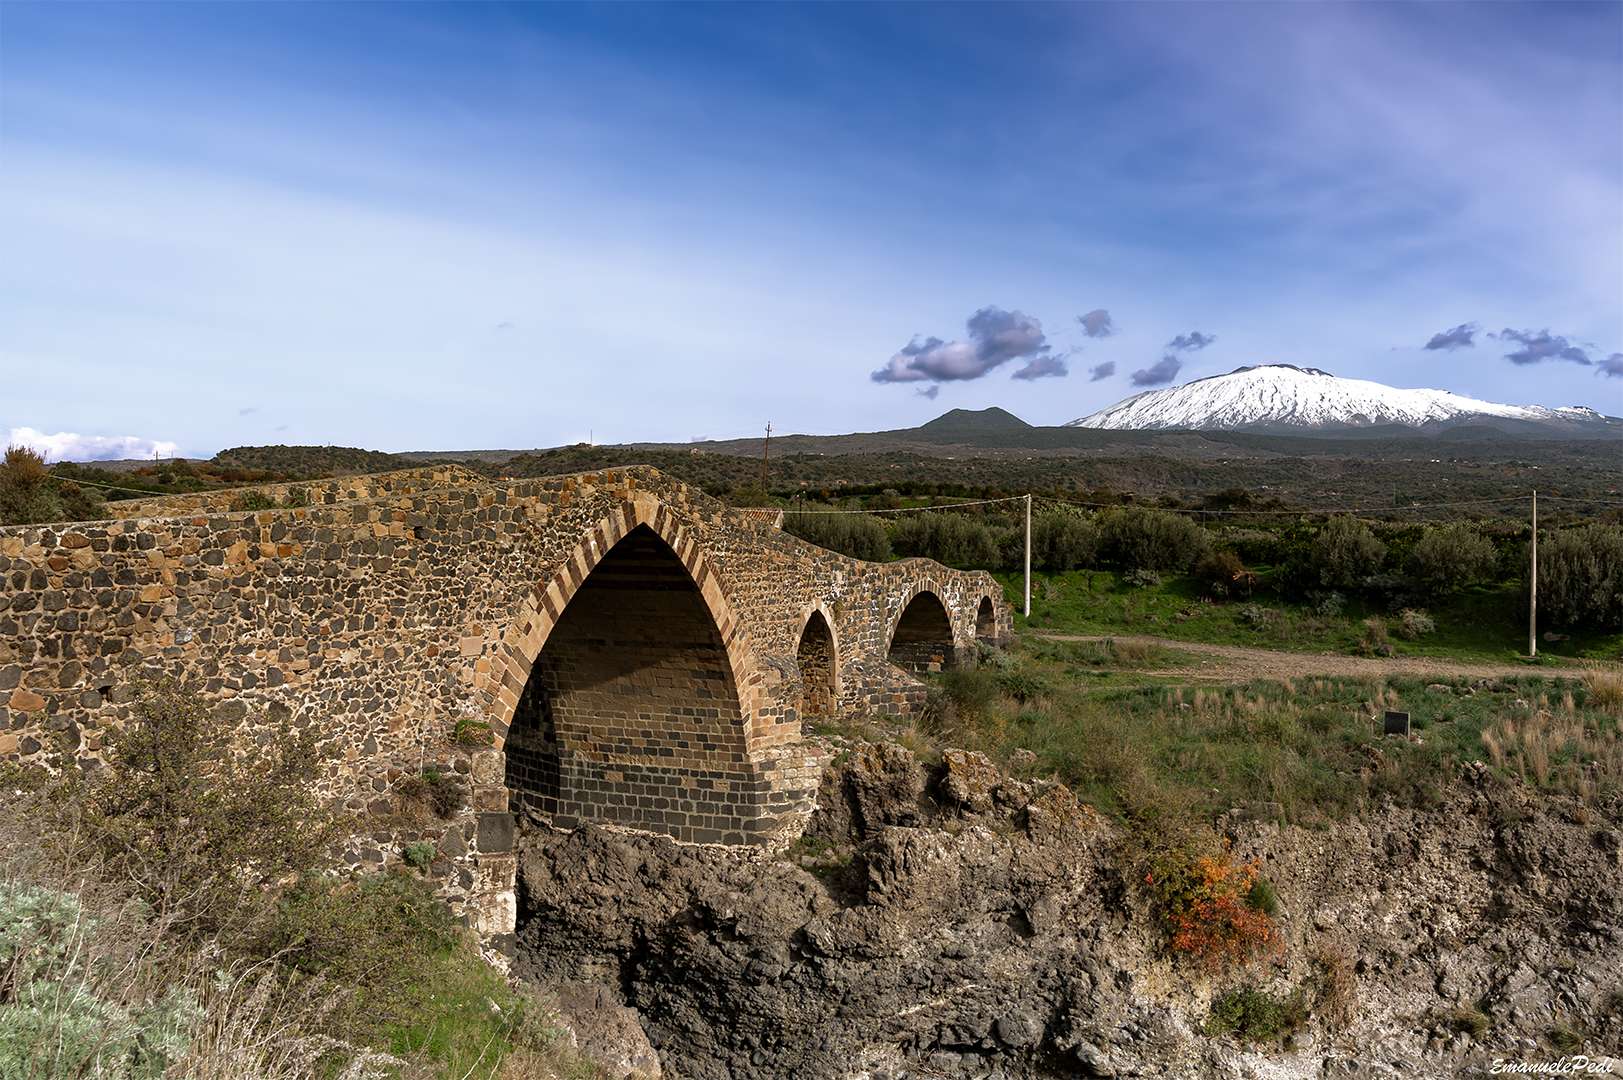 the Saracen on the slopes of the etna...